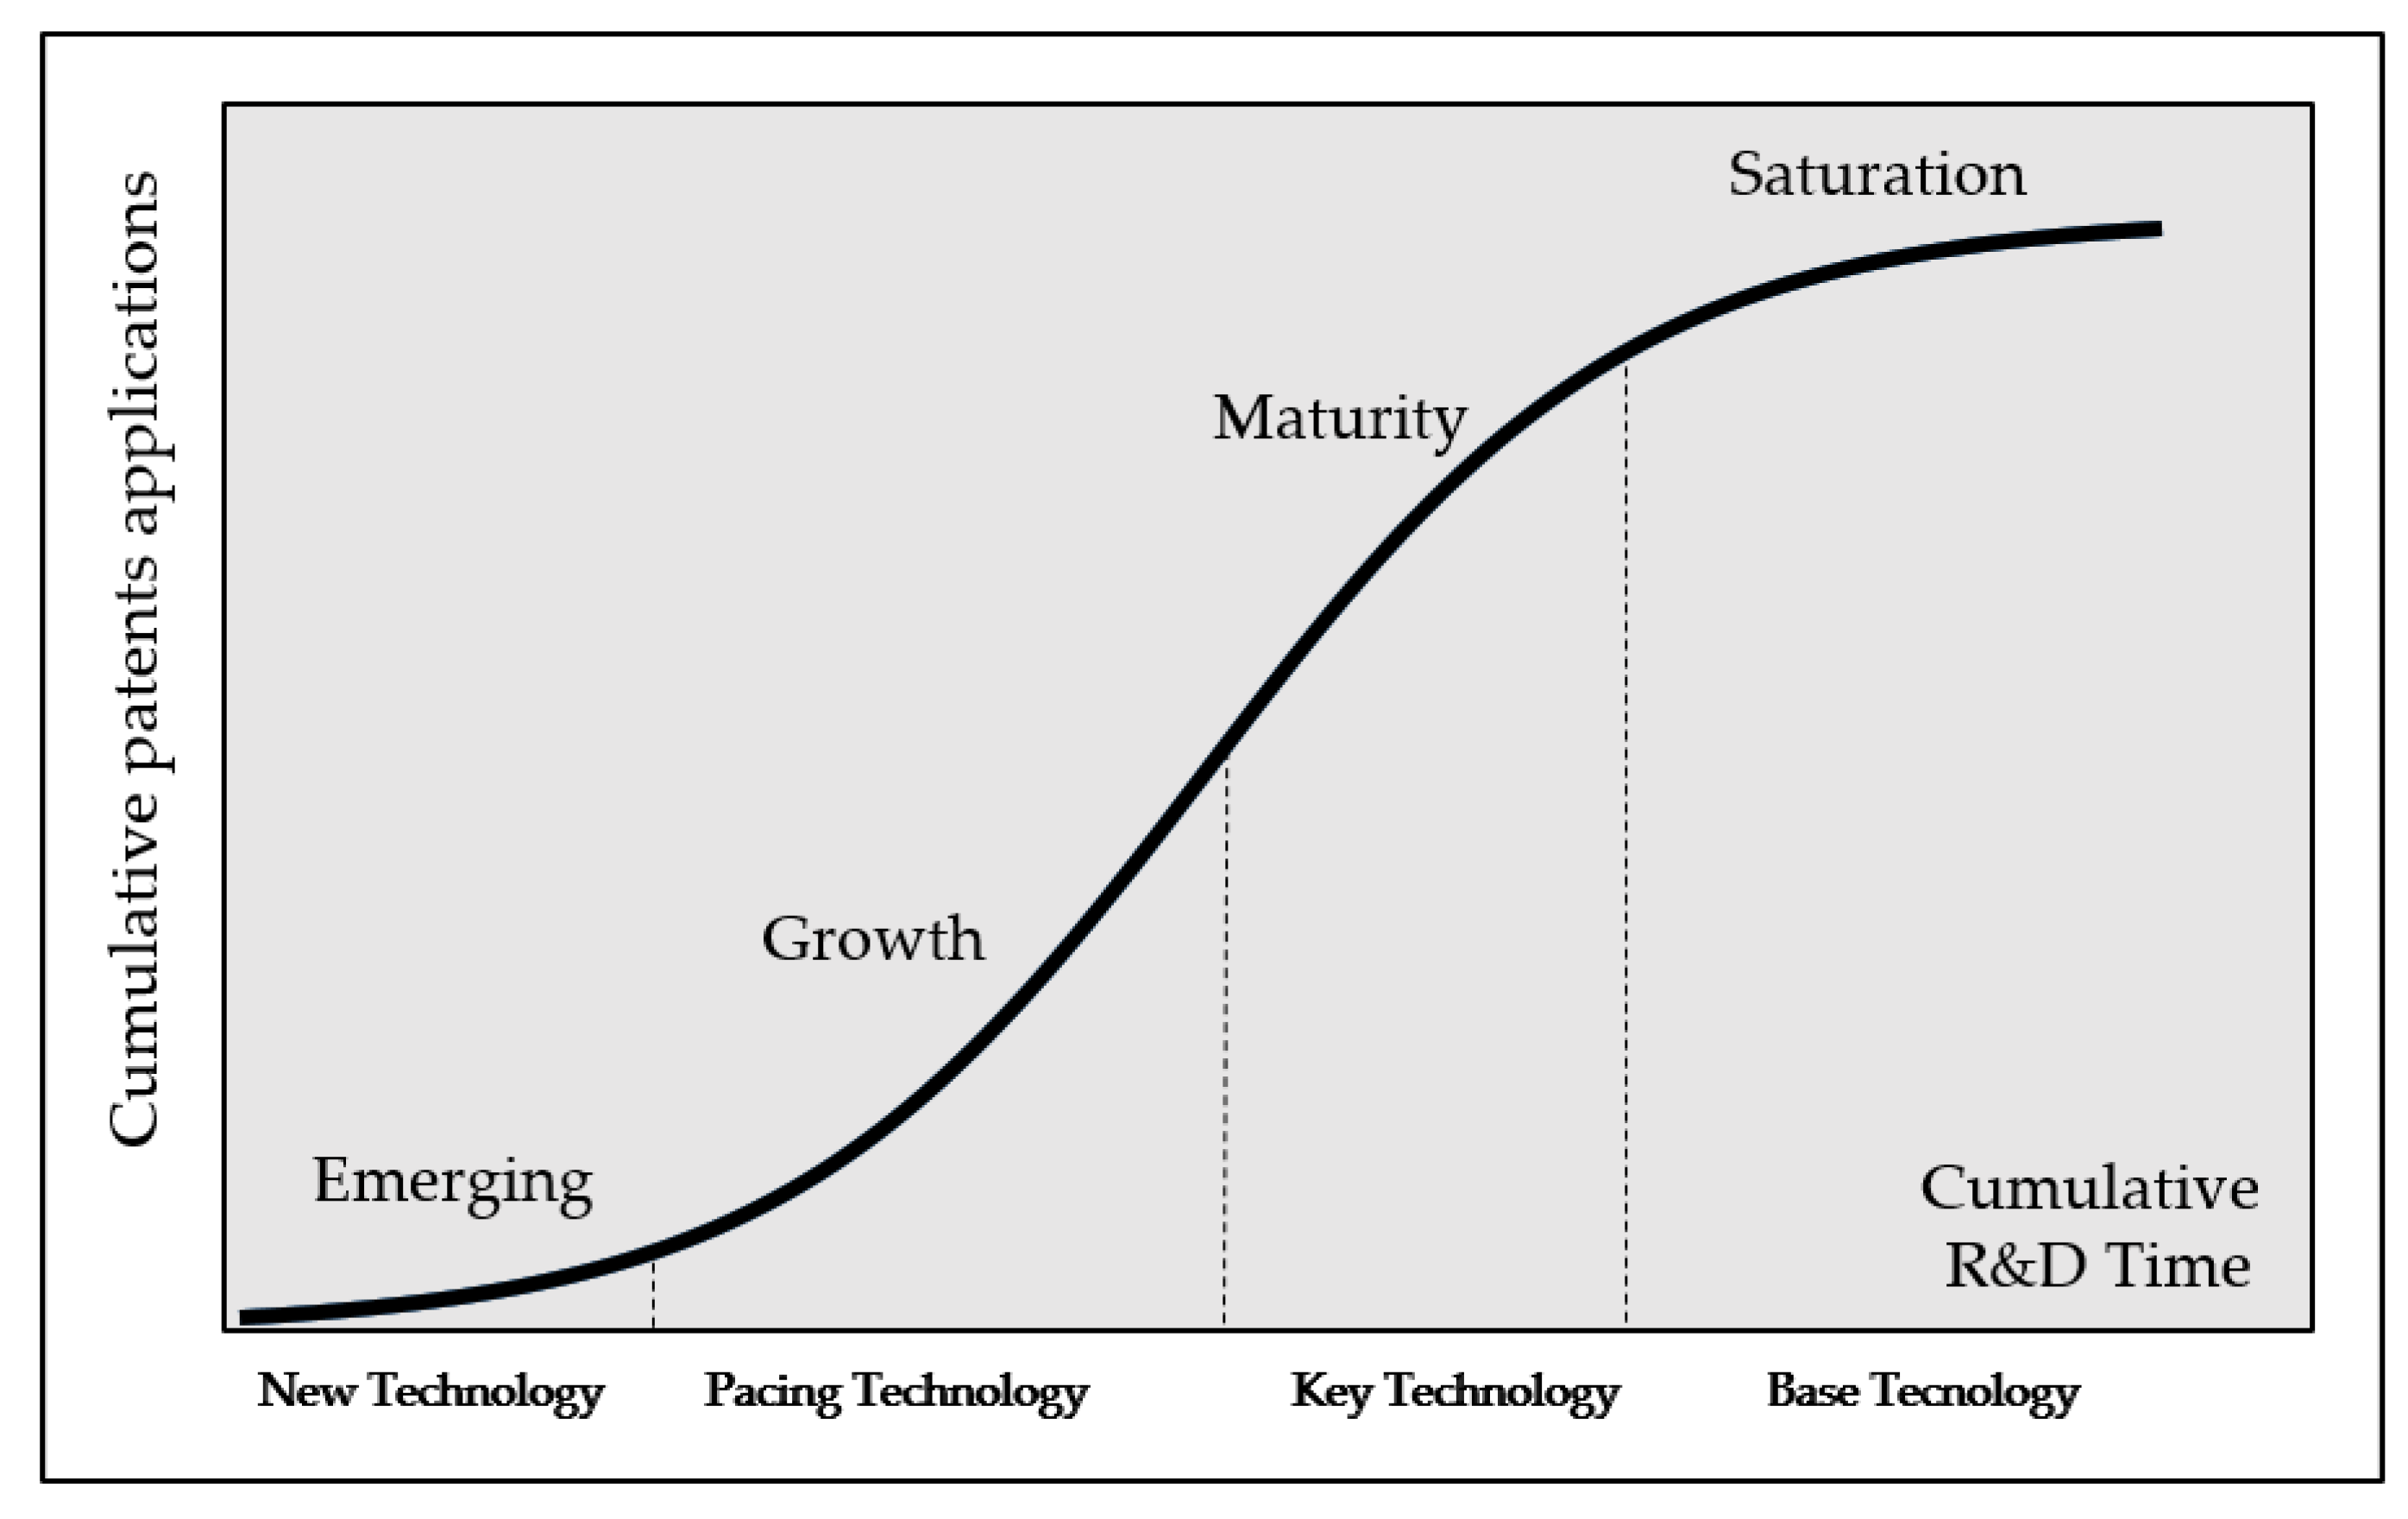 The technology maturity curve